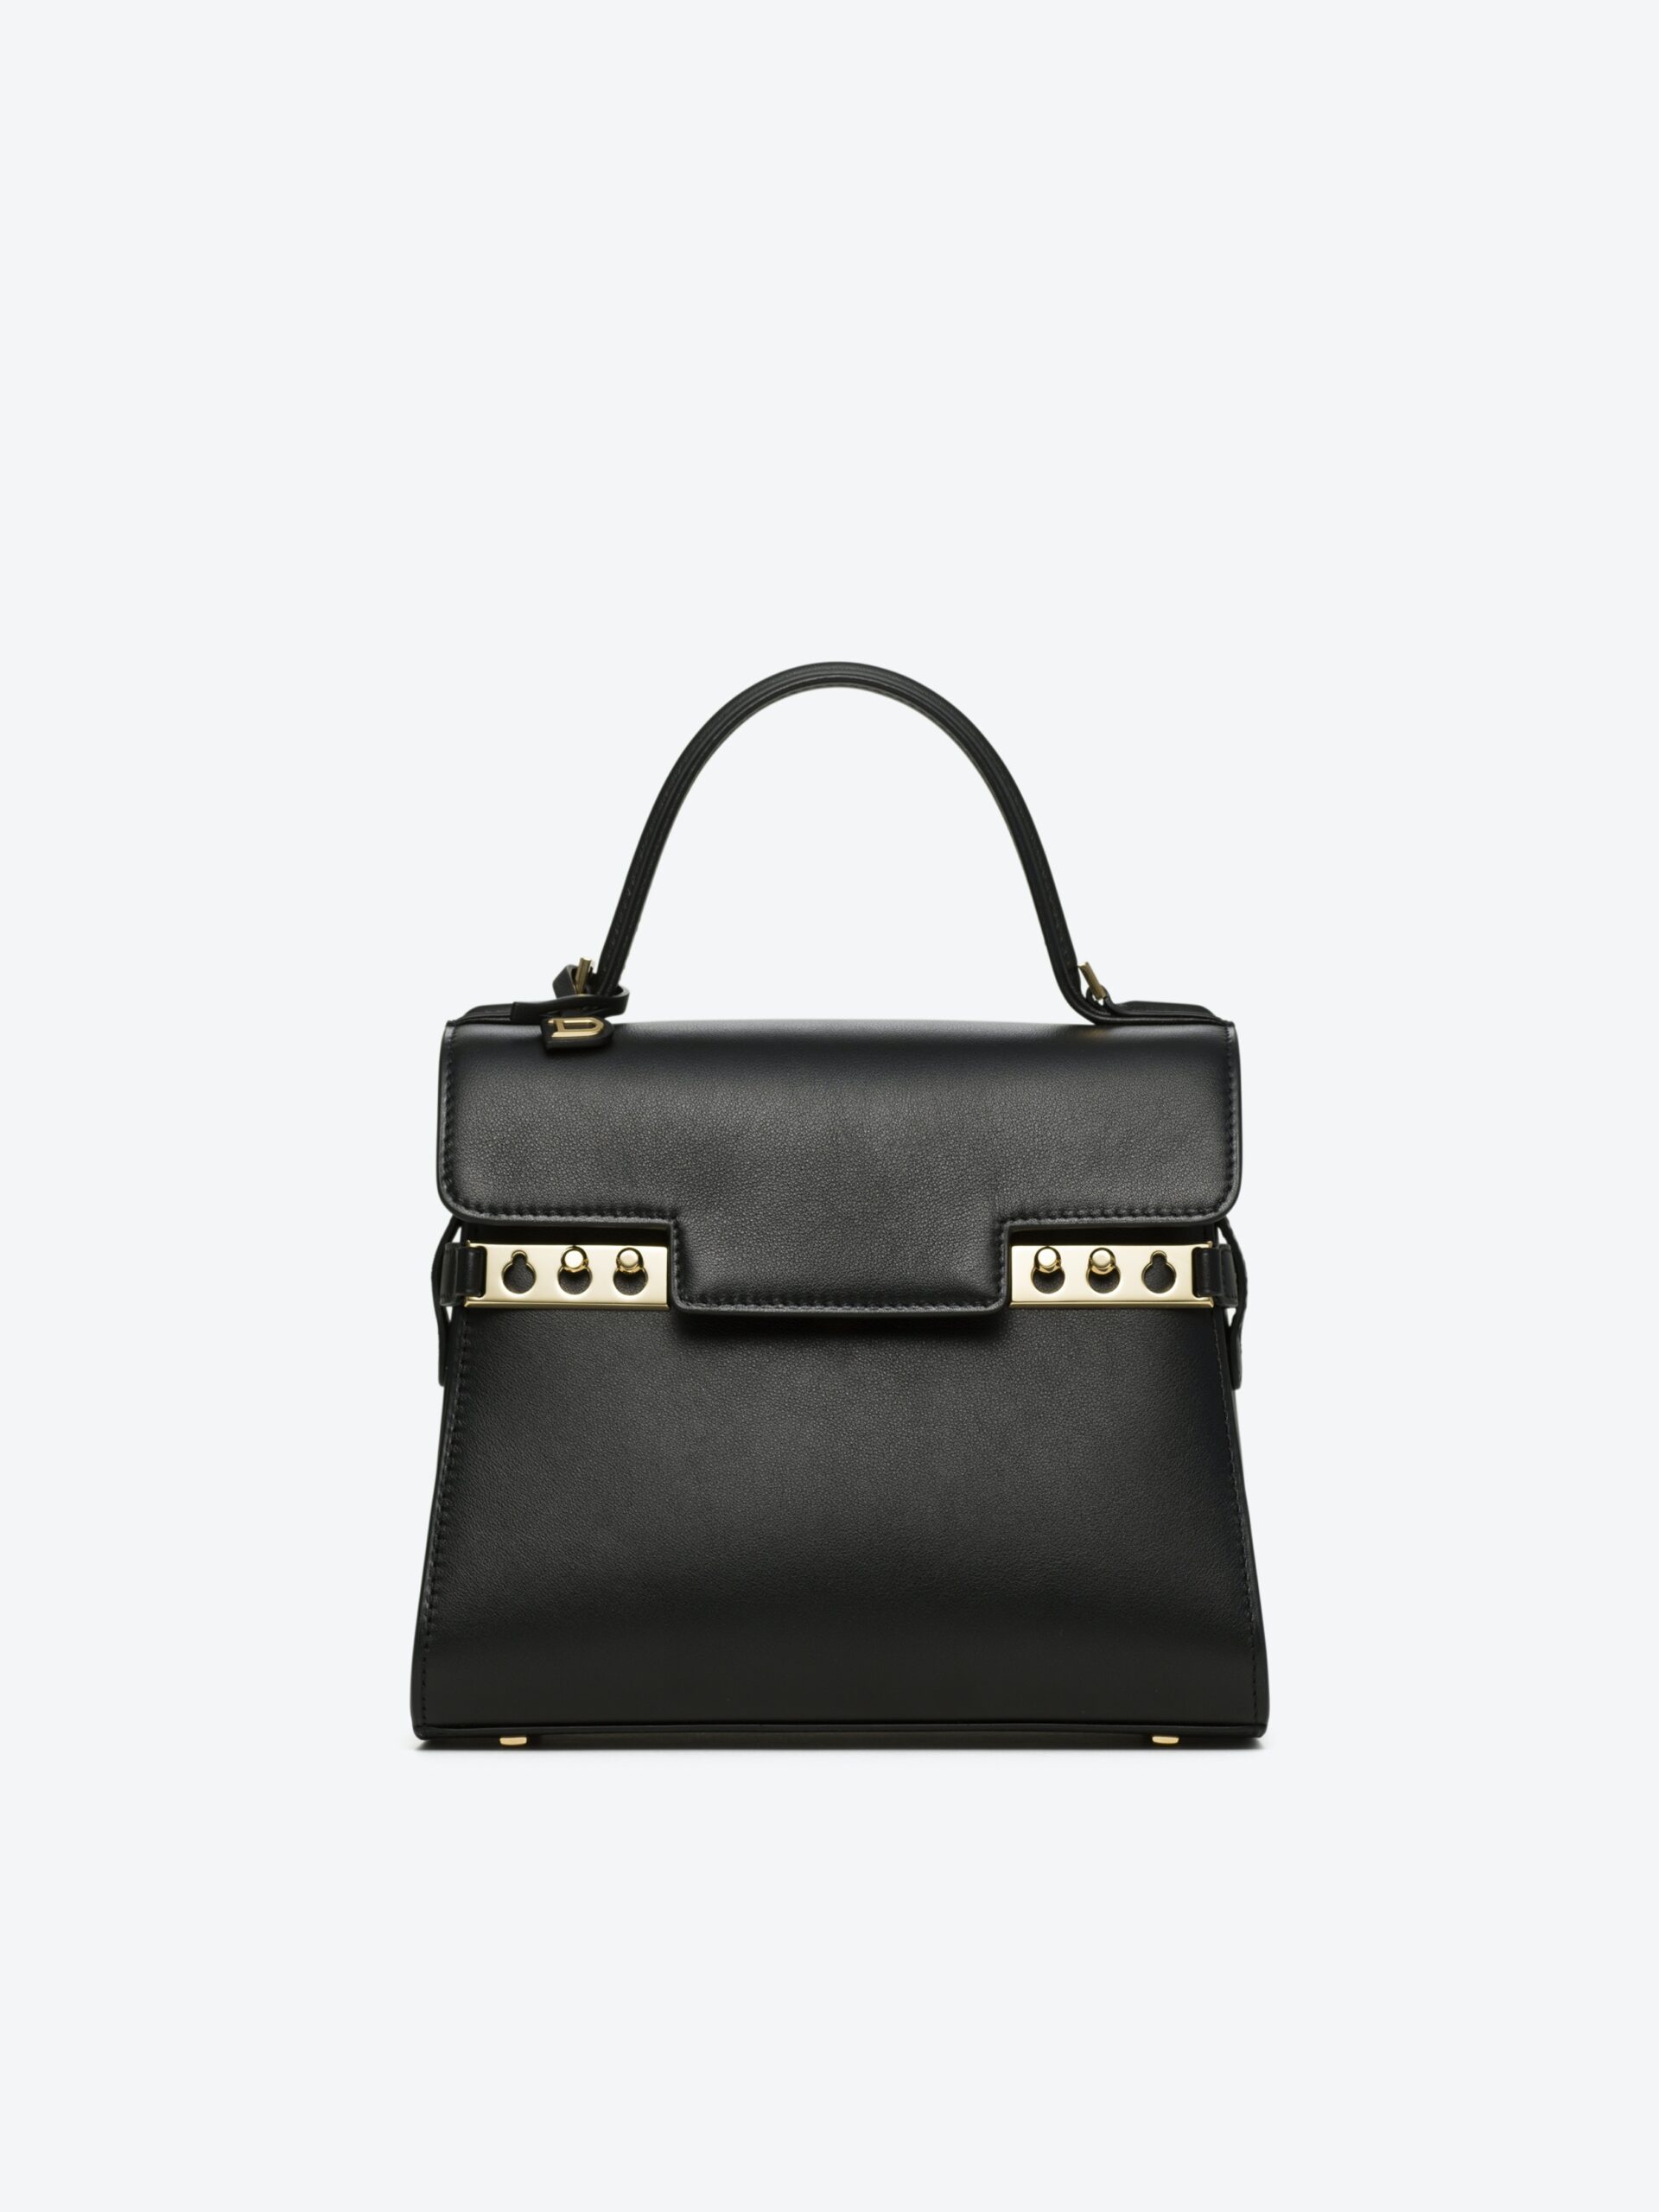 7 Luxury Designer Bags under £1000 I am obsessed with and So will